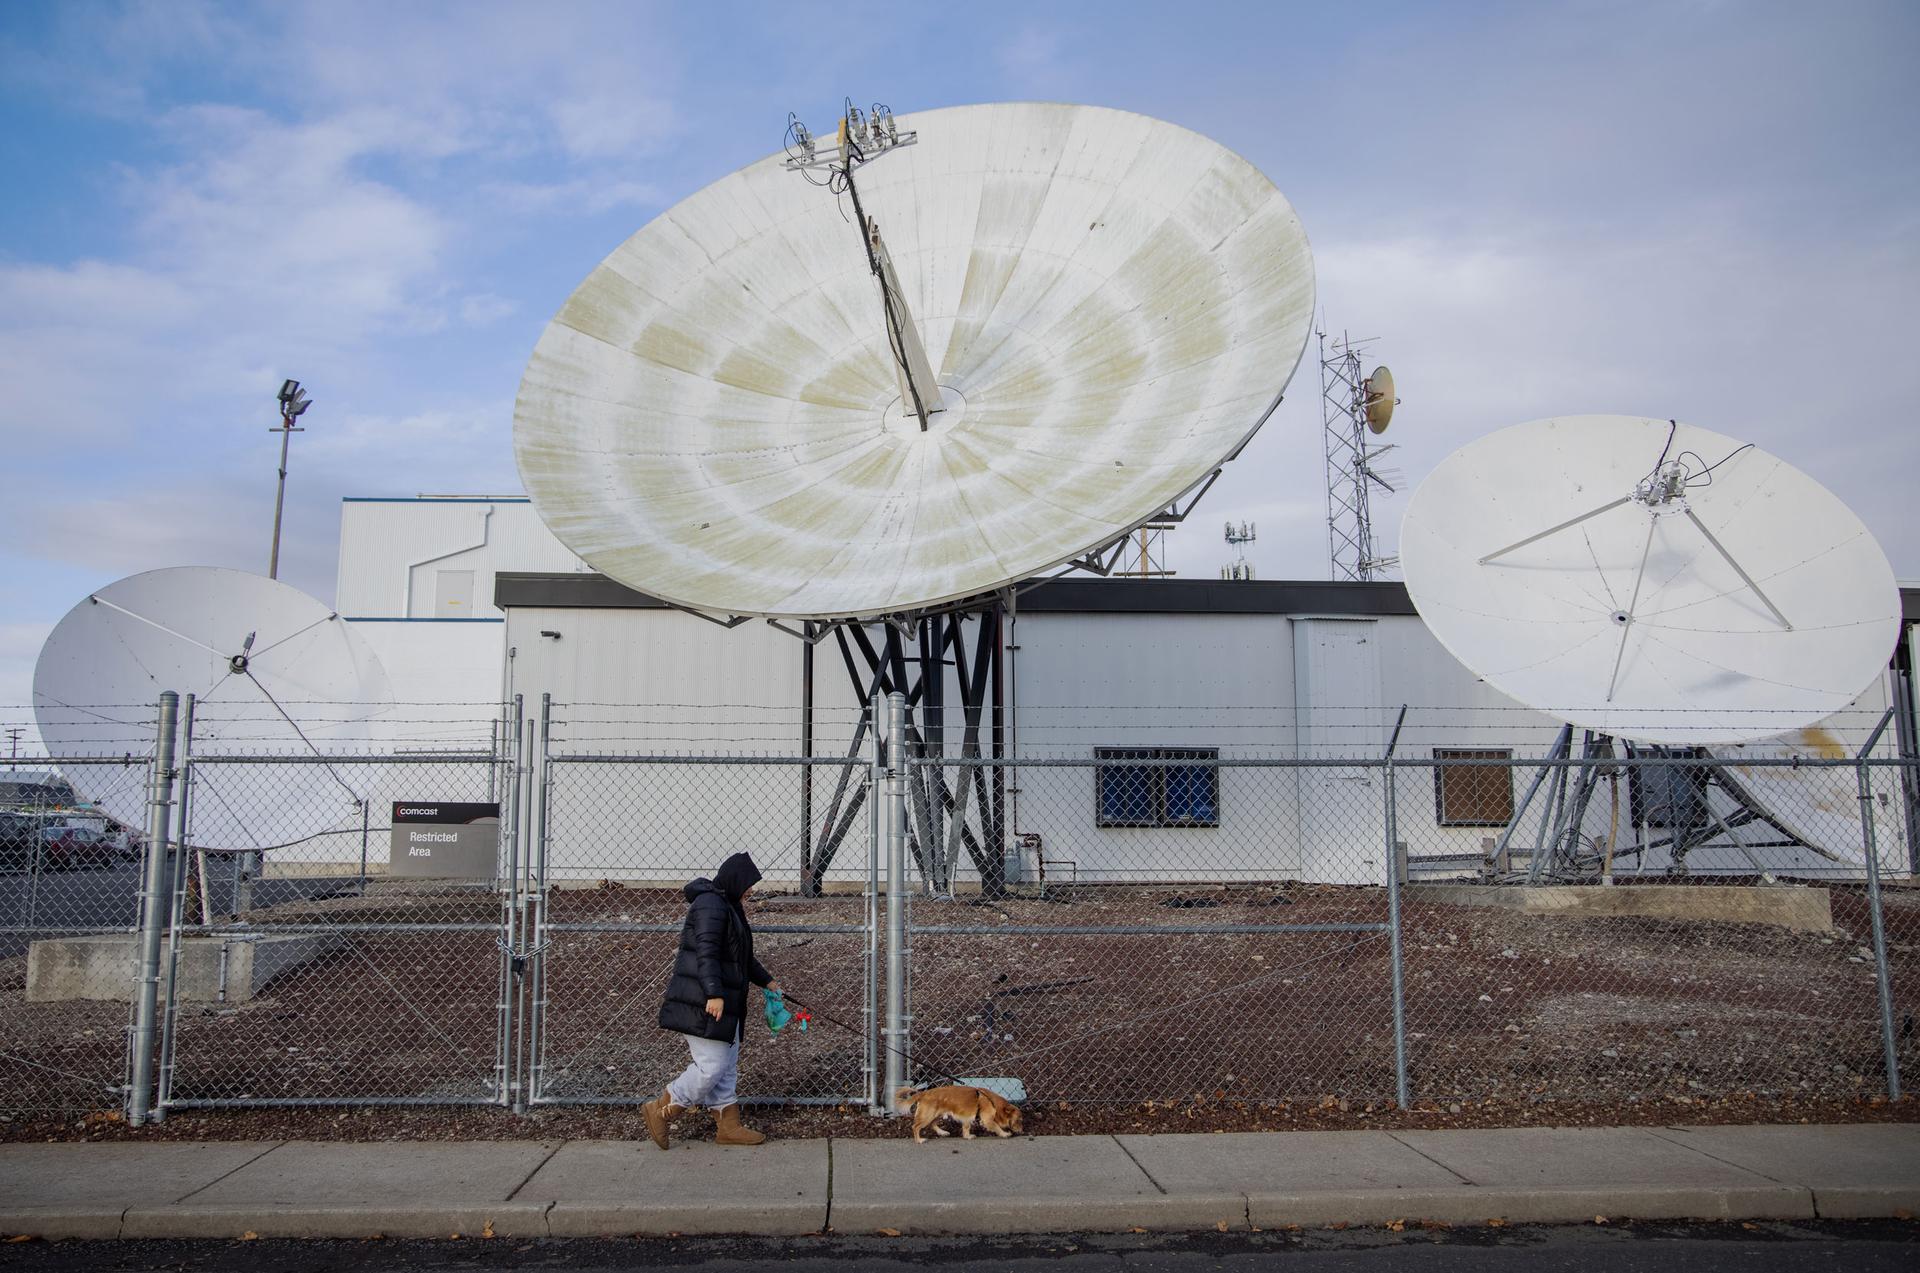 A woman is shown walking a small brown dog with a chain link fence and large satellite dishes in the distance.